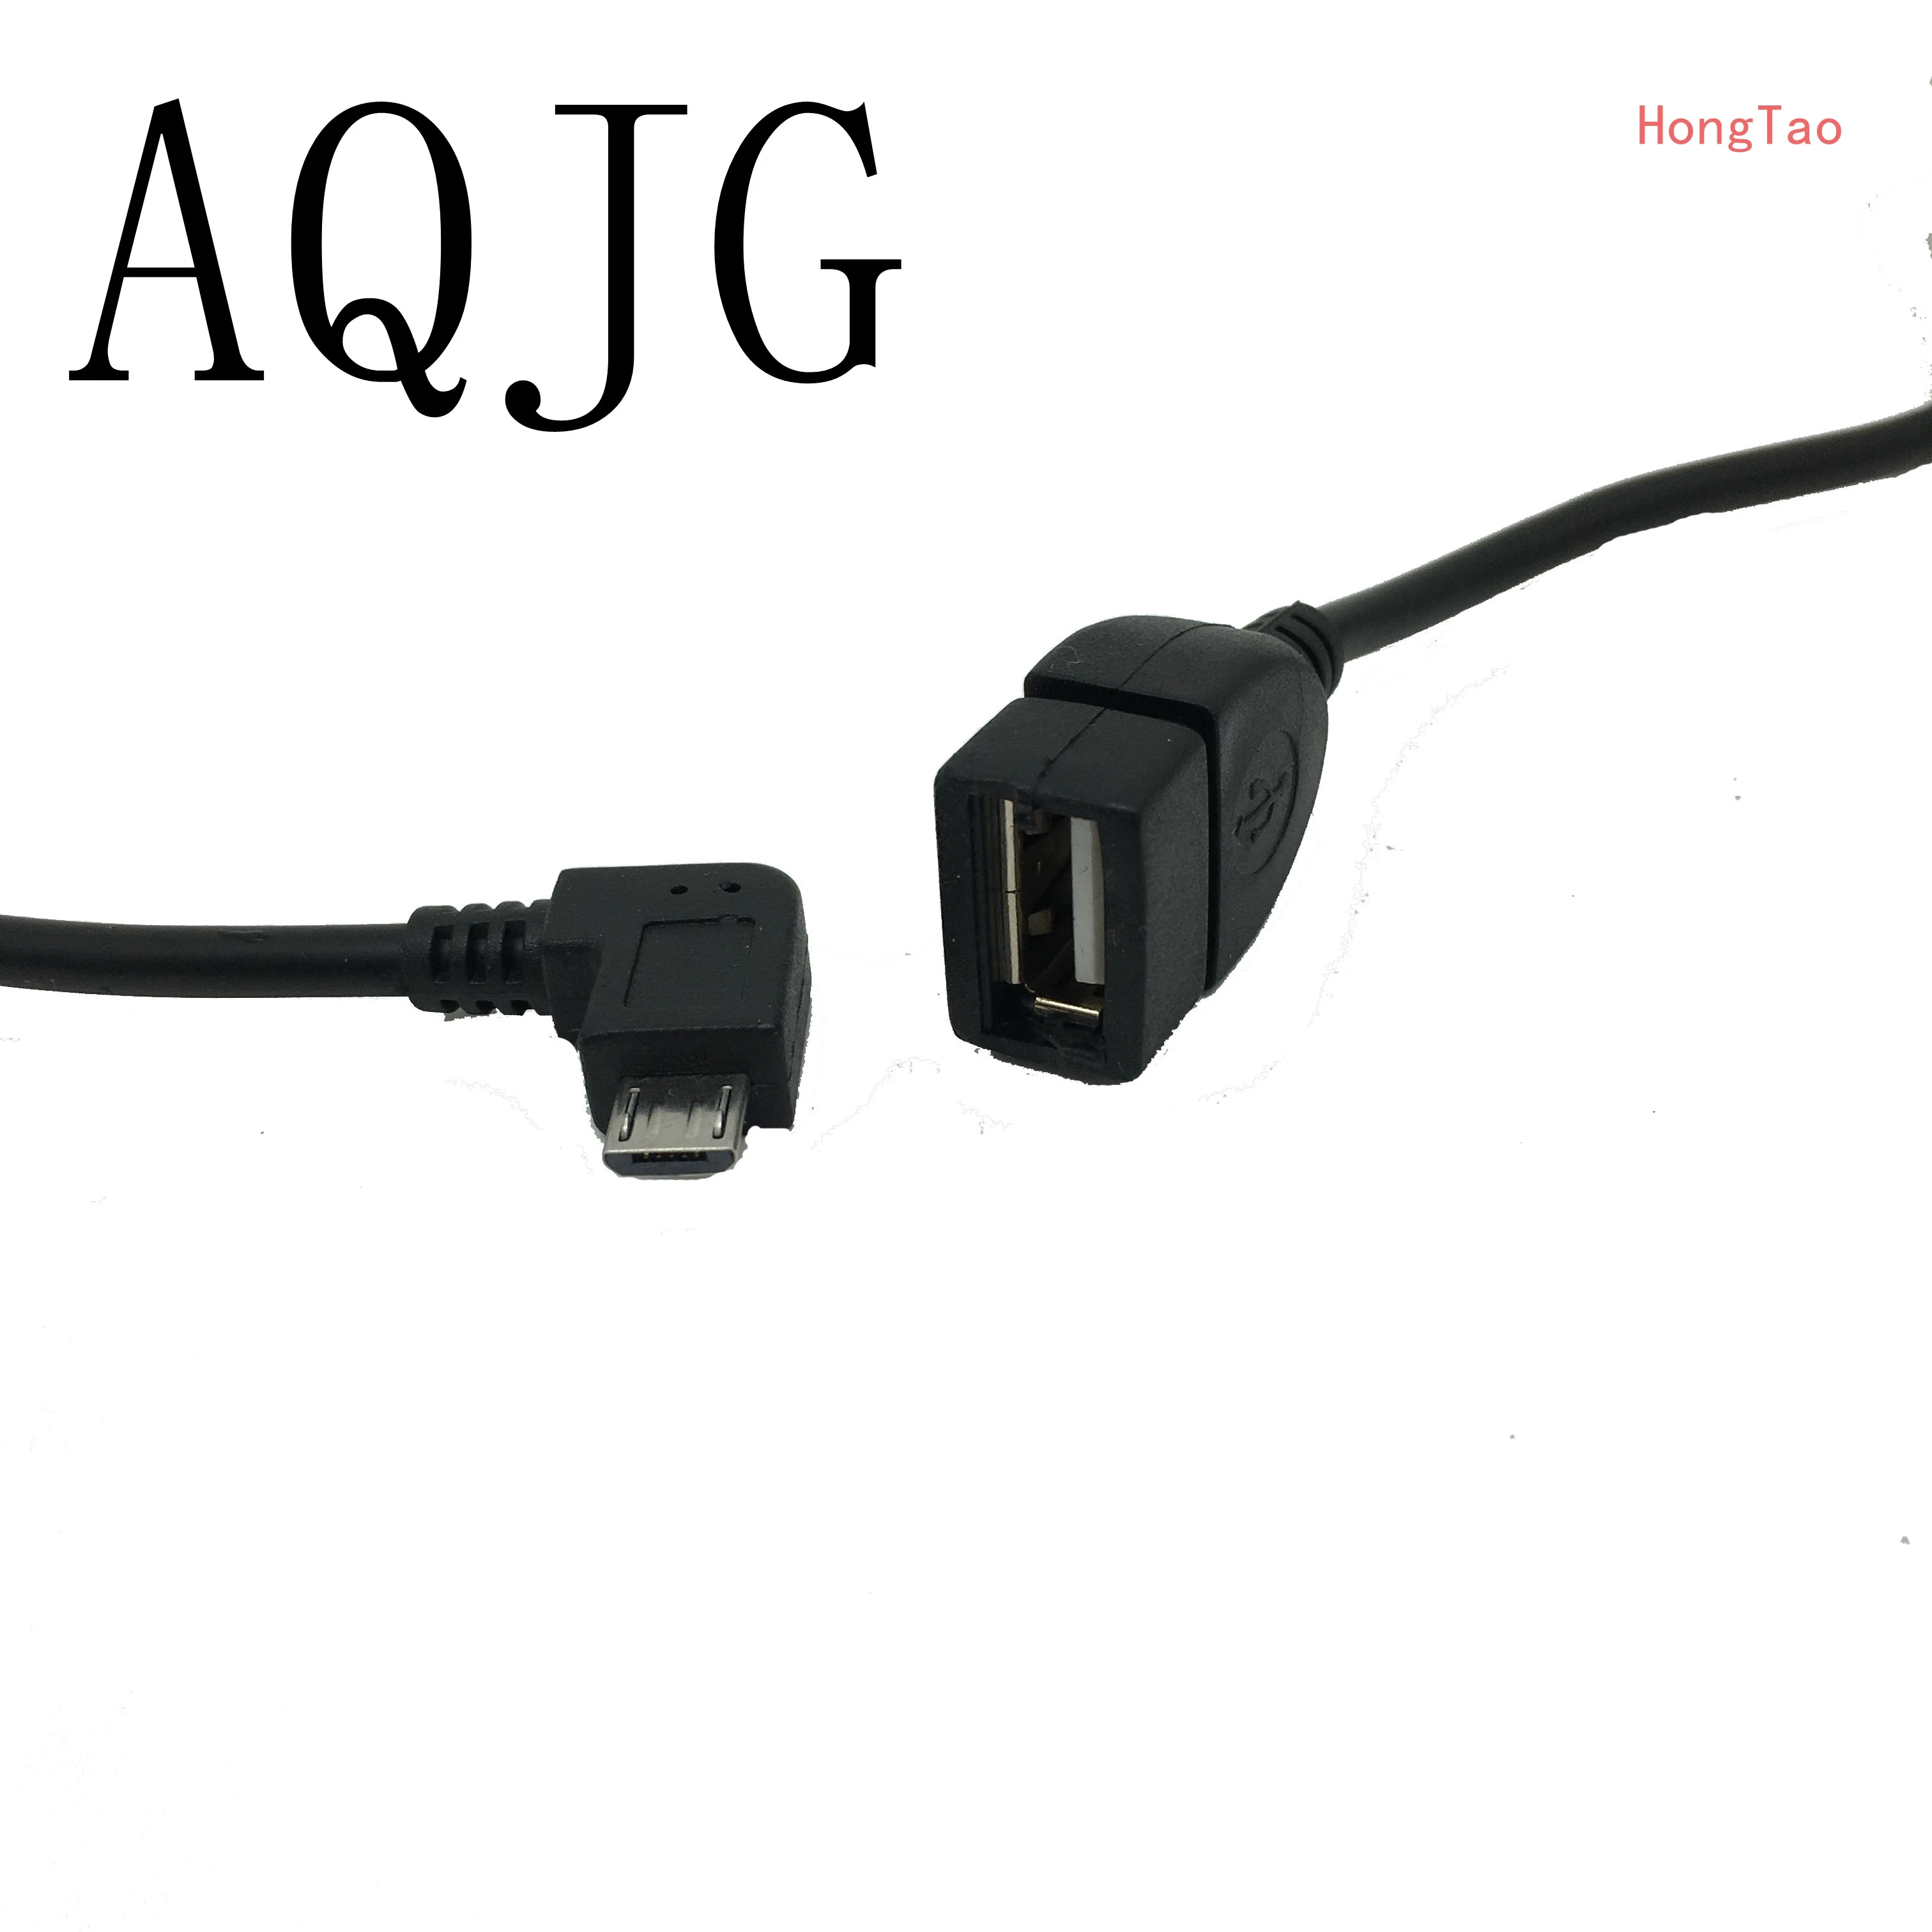 

90 Degree Angled OTG Cable USB 2.0 Female to Micro USB Male Data Host for Samsung Galaxy s3 s4 s2 Note 2 HTC etc with micro USB